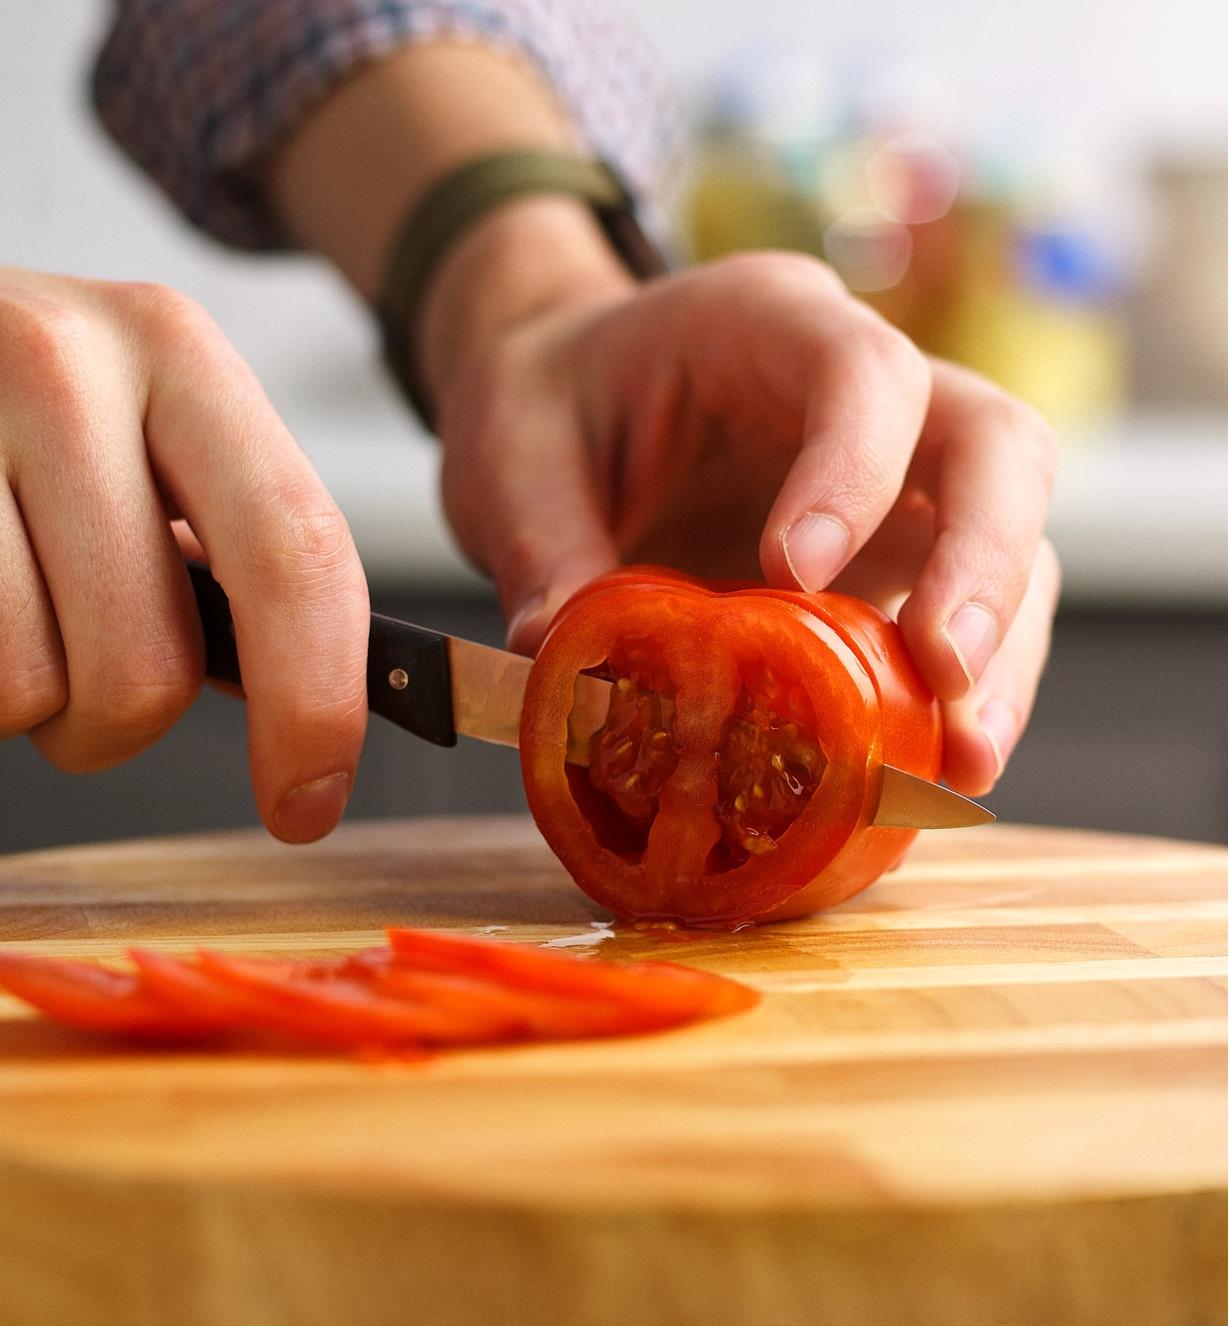 Slicing a tomato with the serrated paring knife